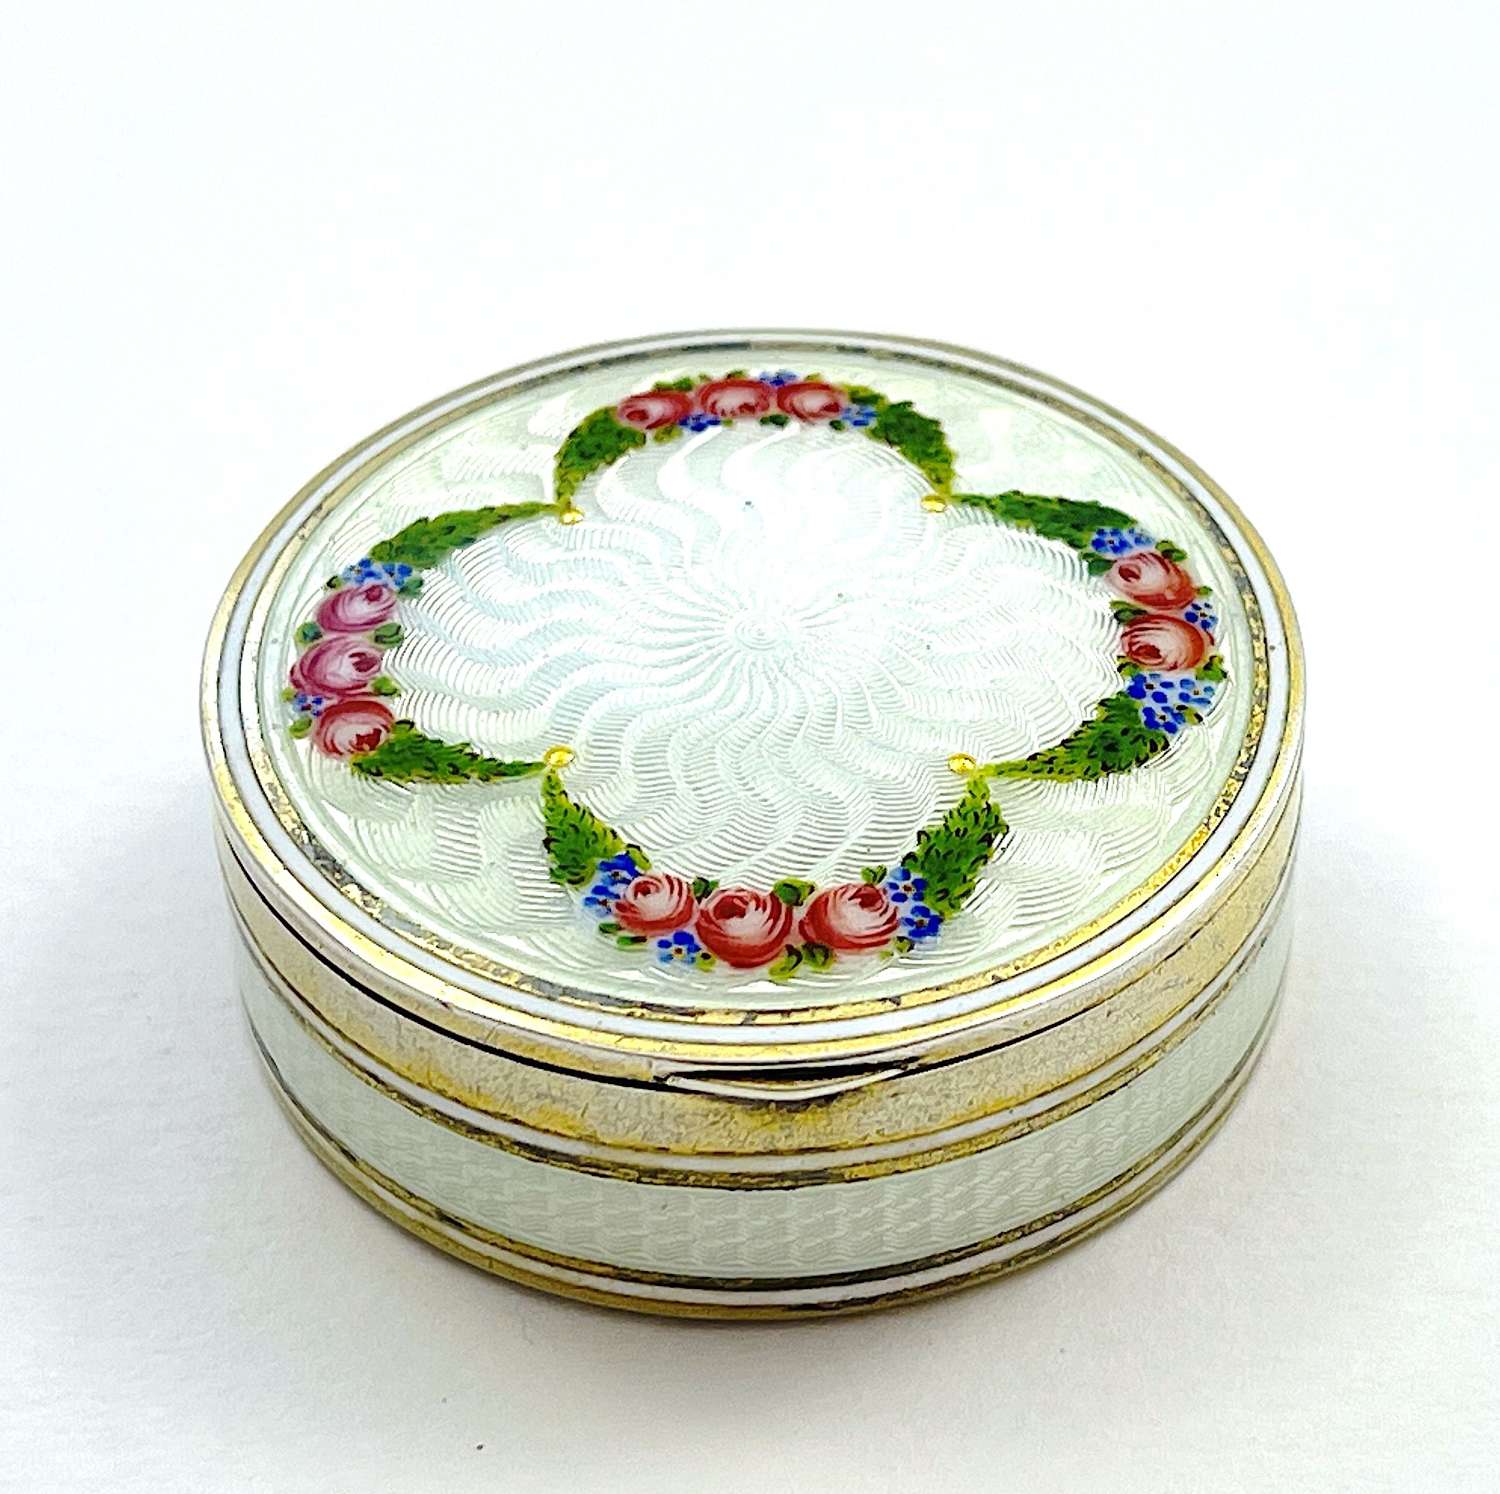 Antique Guilloche Enamel and Silver Pill Box Decorated with Roses